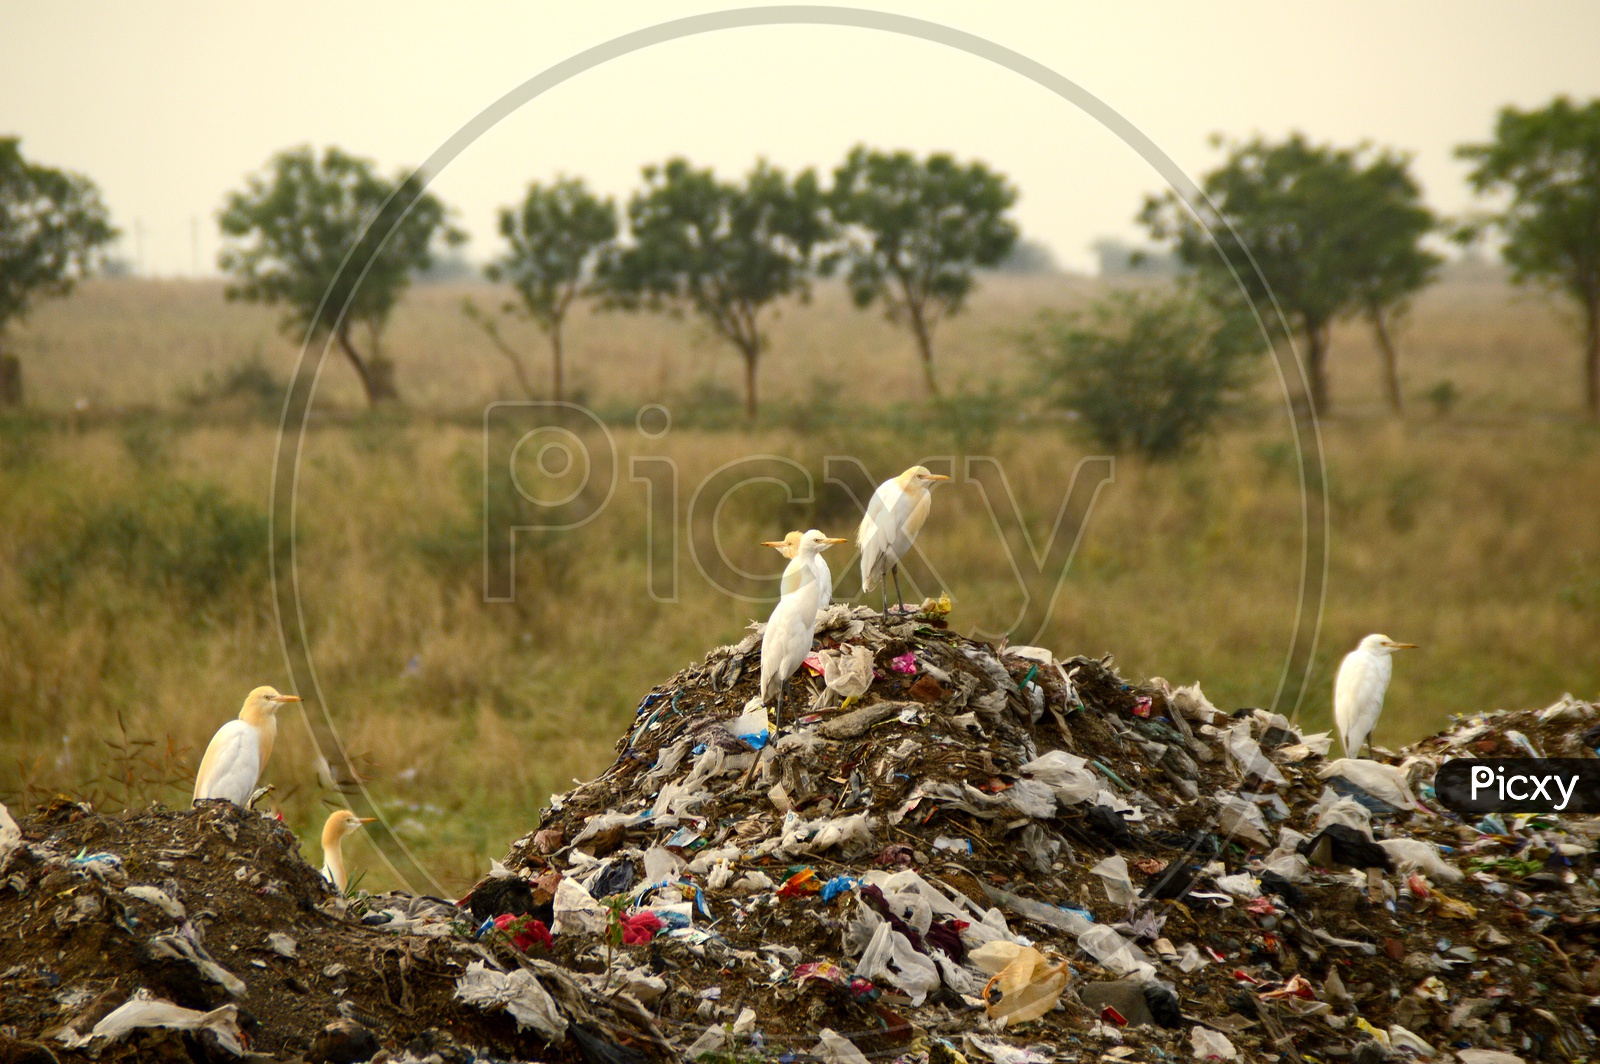 cranes On the Garbage Pile